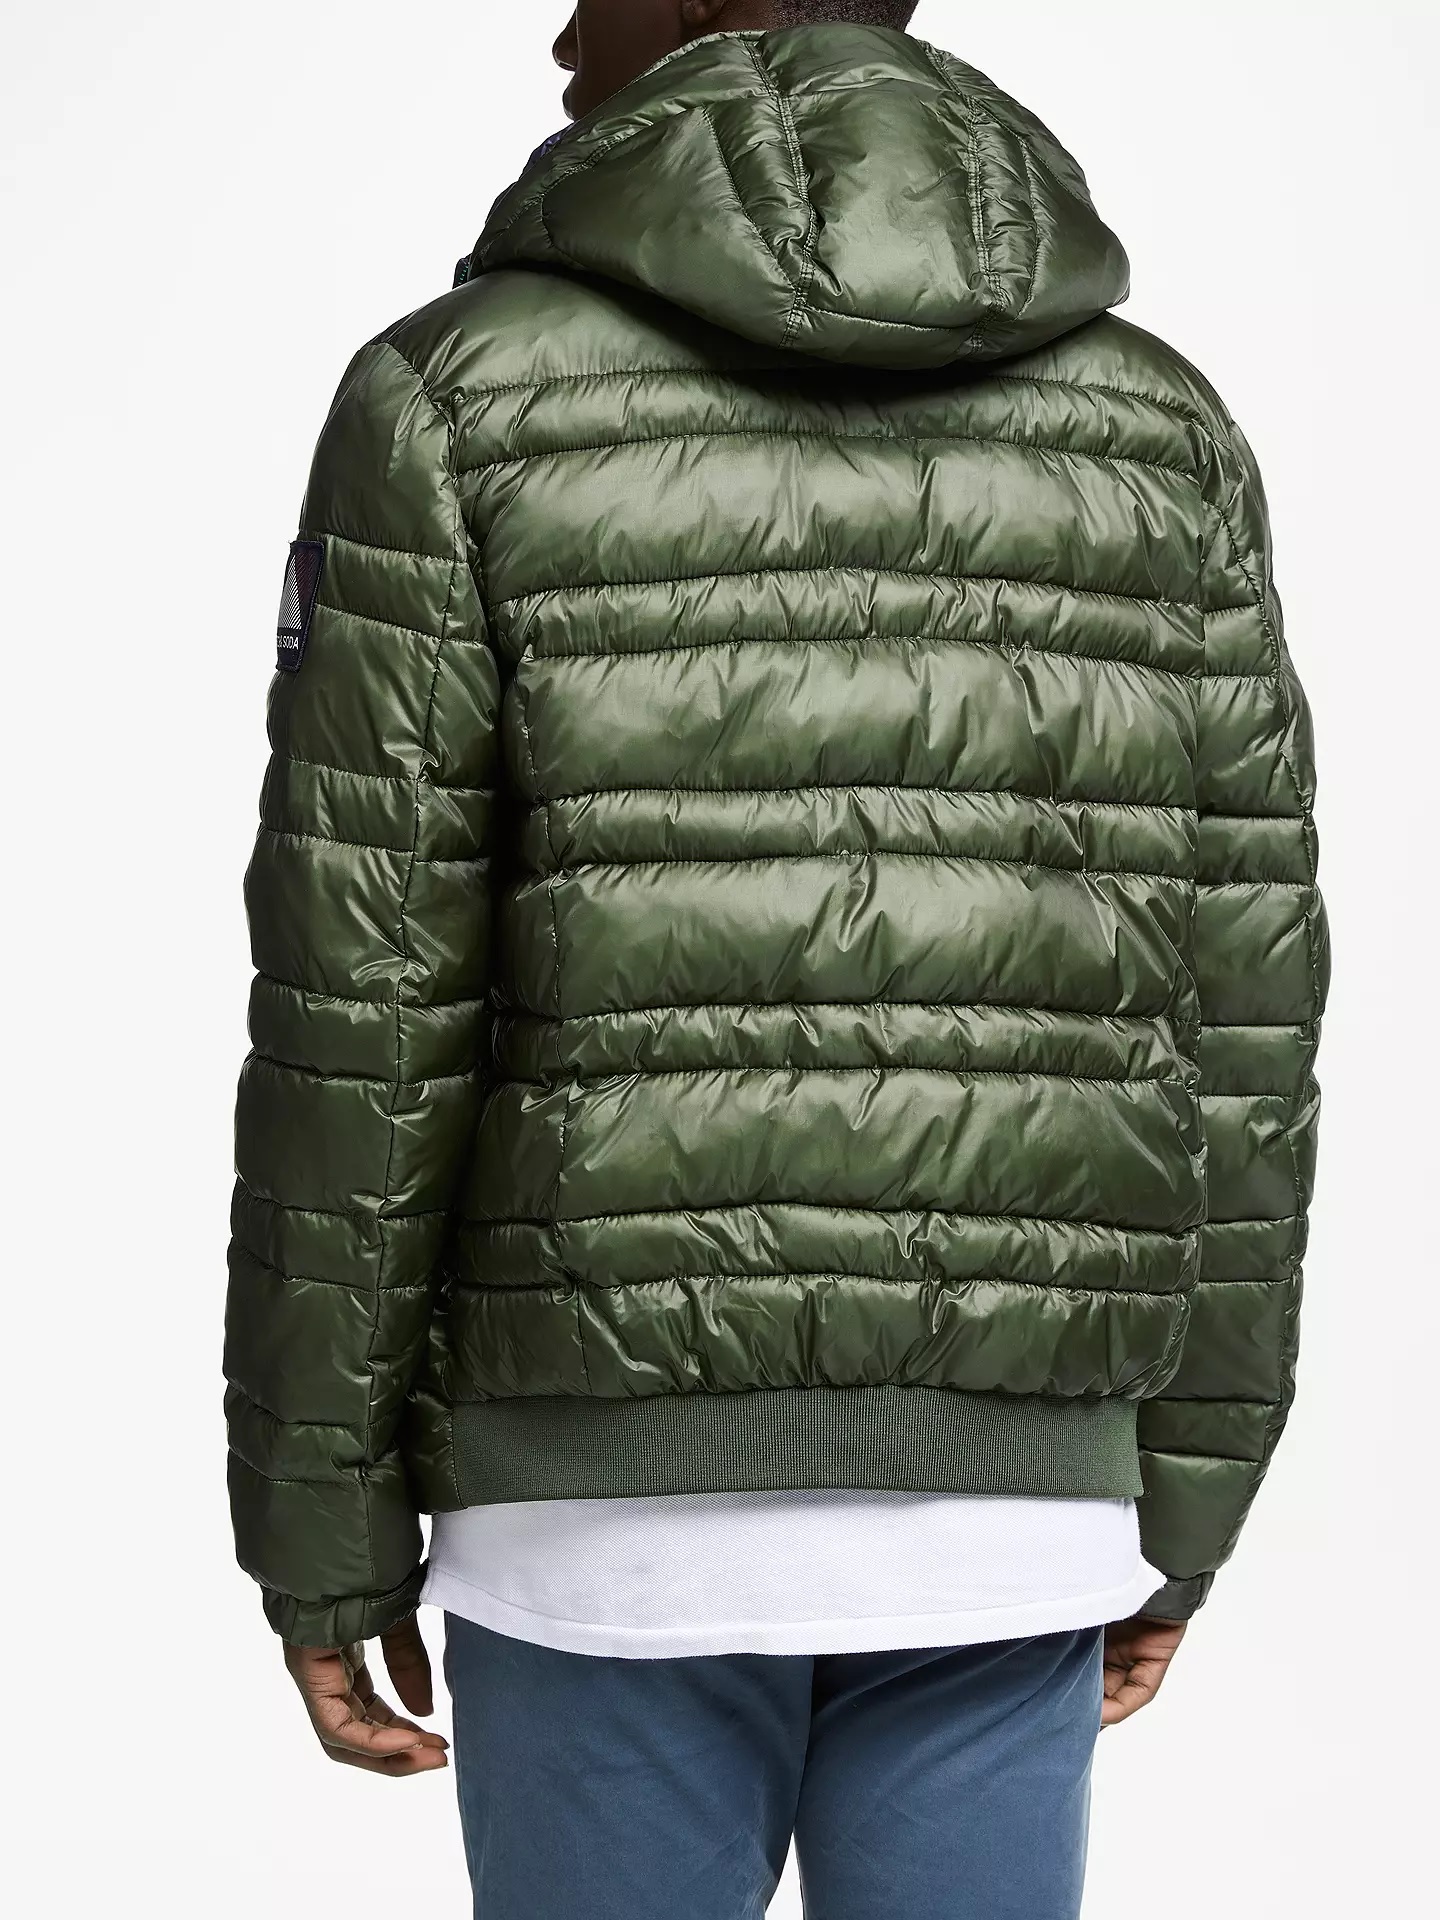 Scotch & Soda MED GREEN Quilted Primaloft Puffer Jacket, US X-Large - image 3 of 3